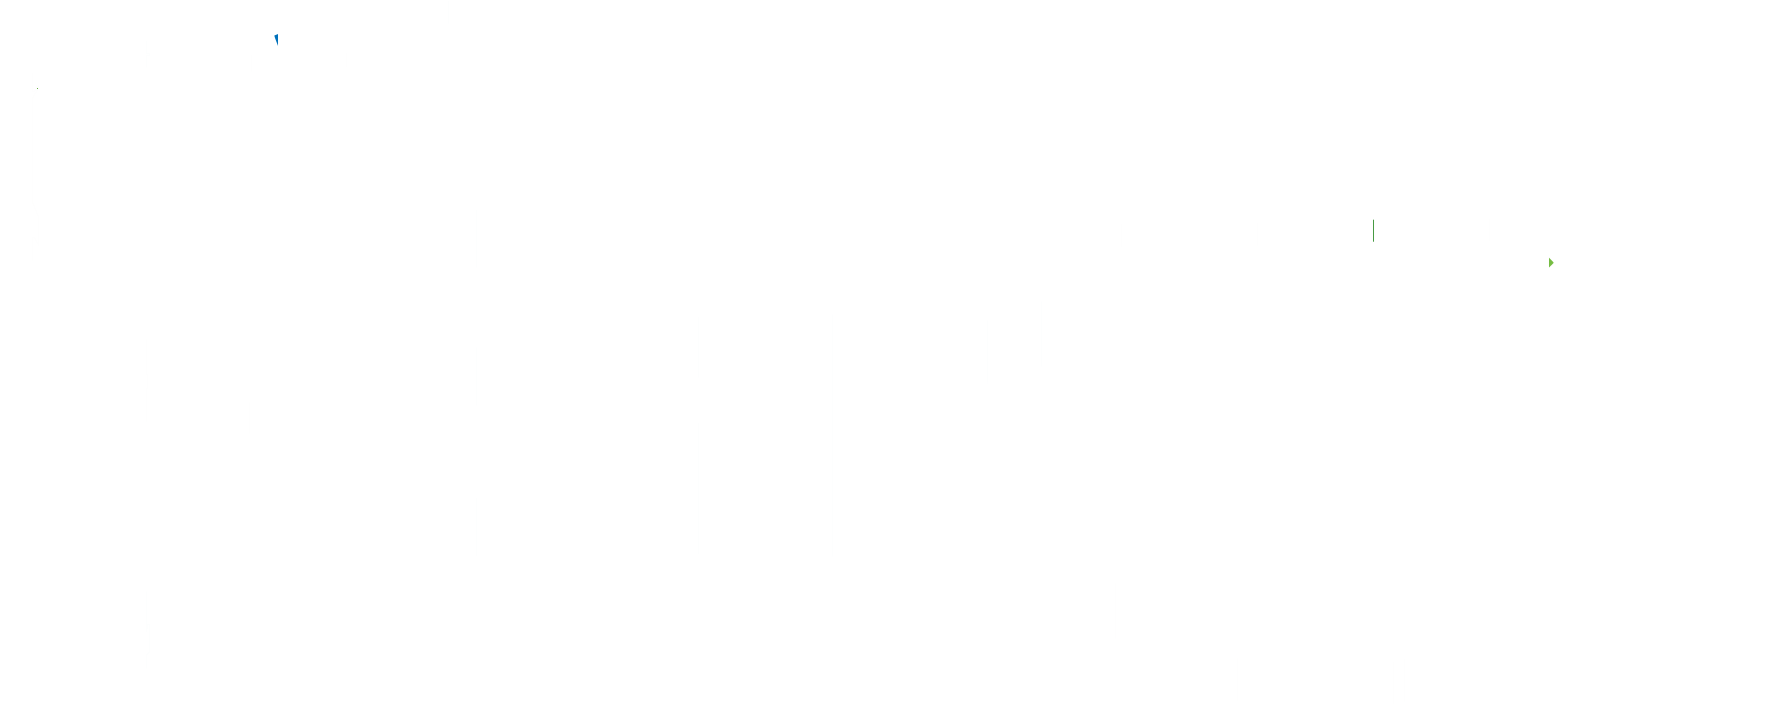 Bareeq For Dental Materials and Equipment